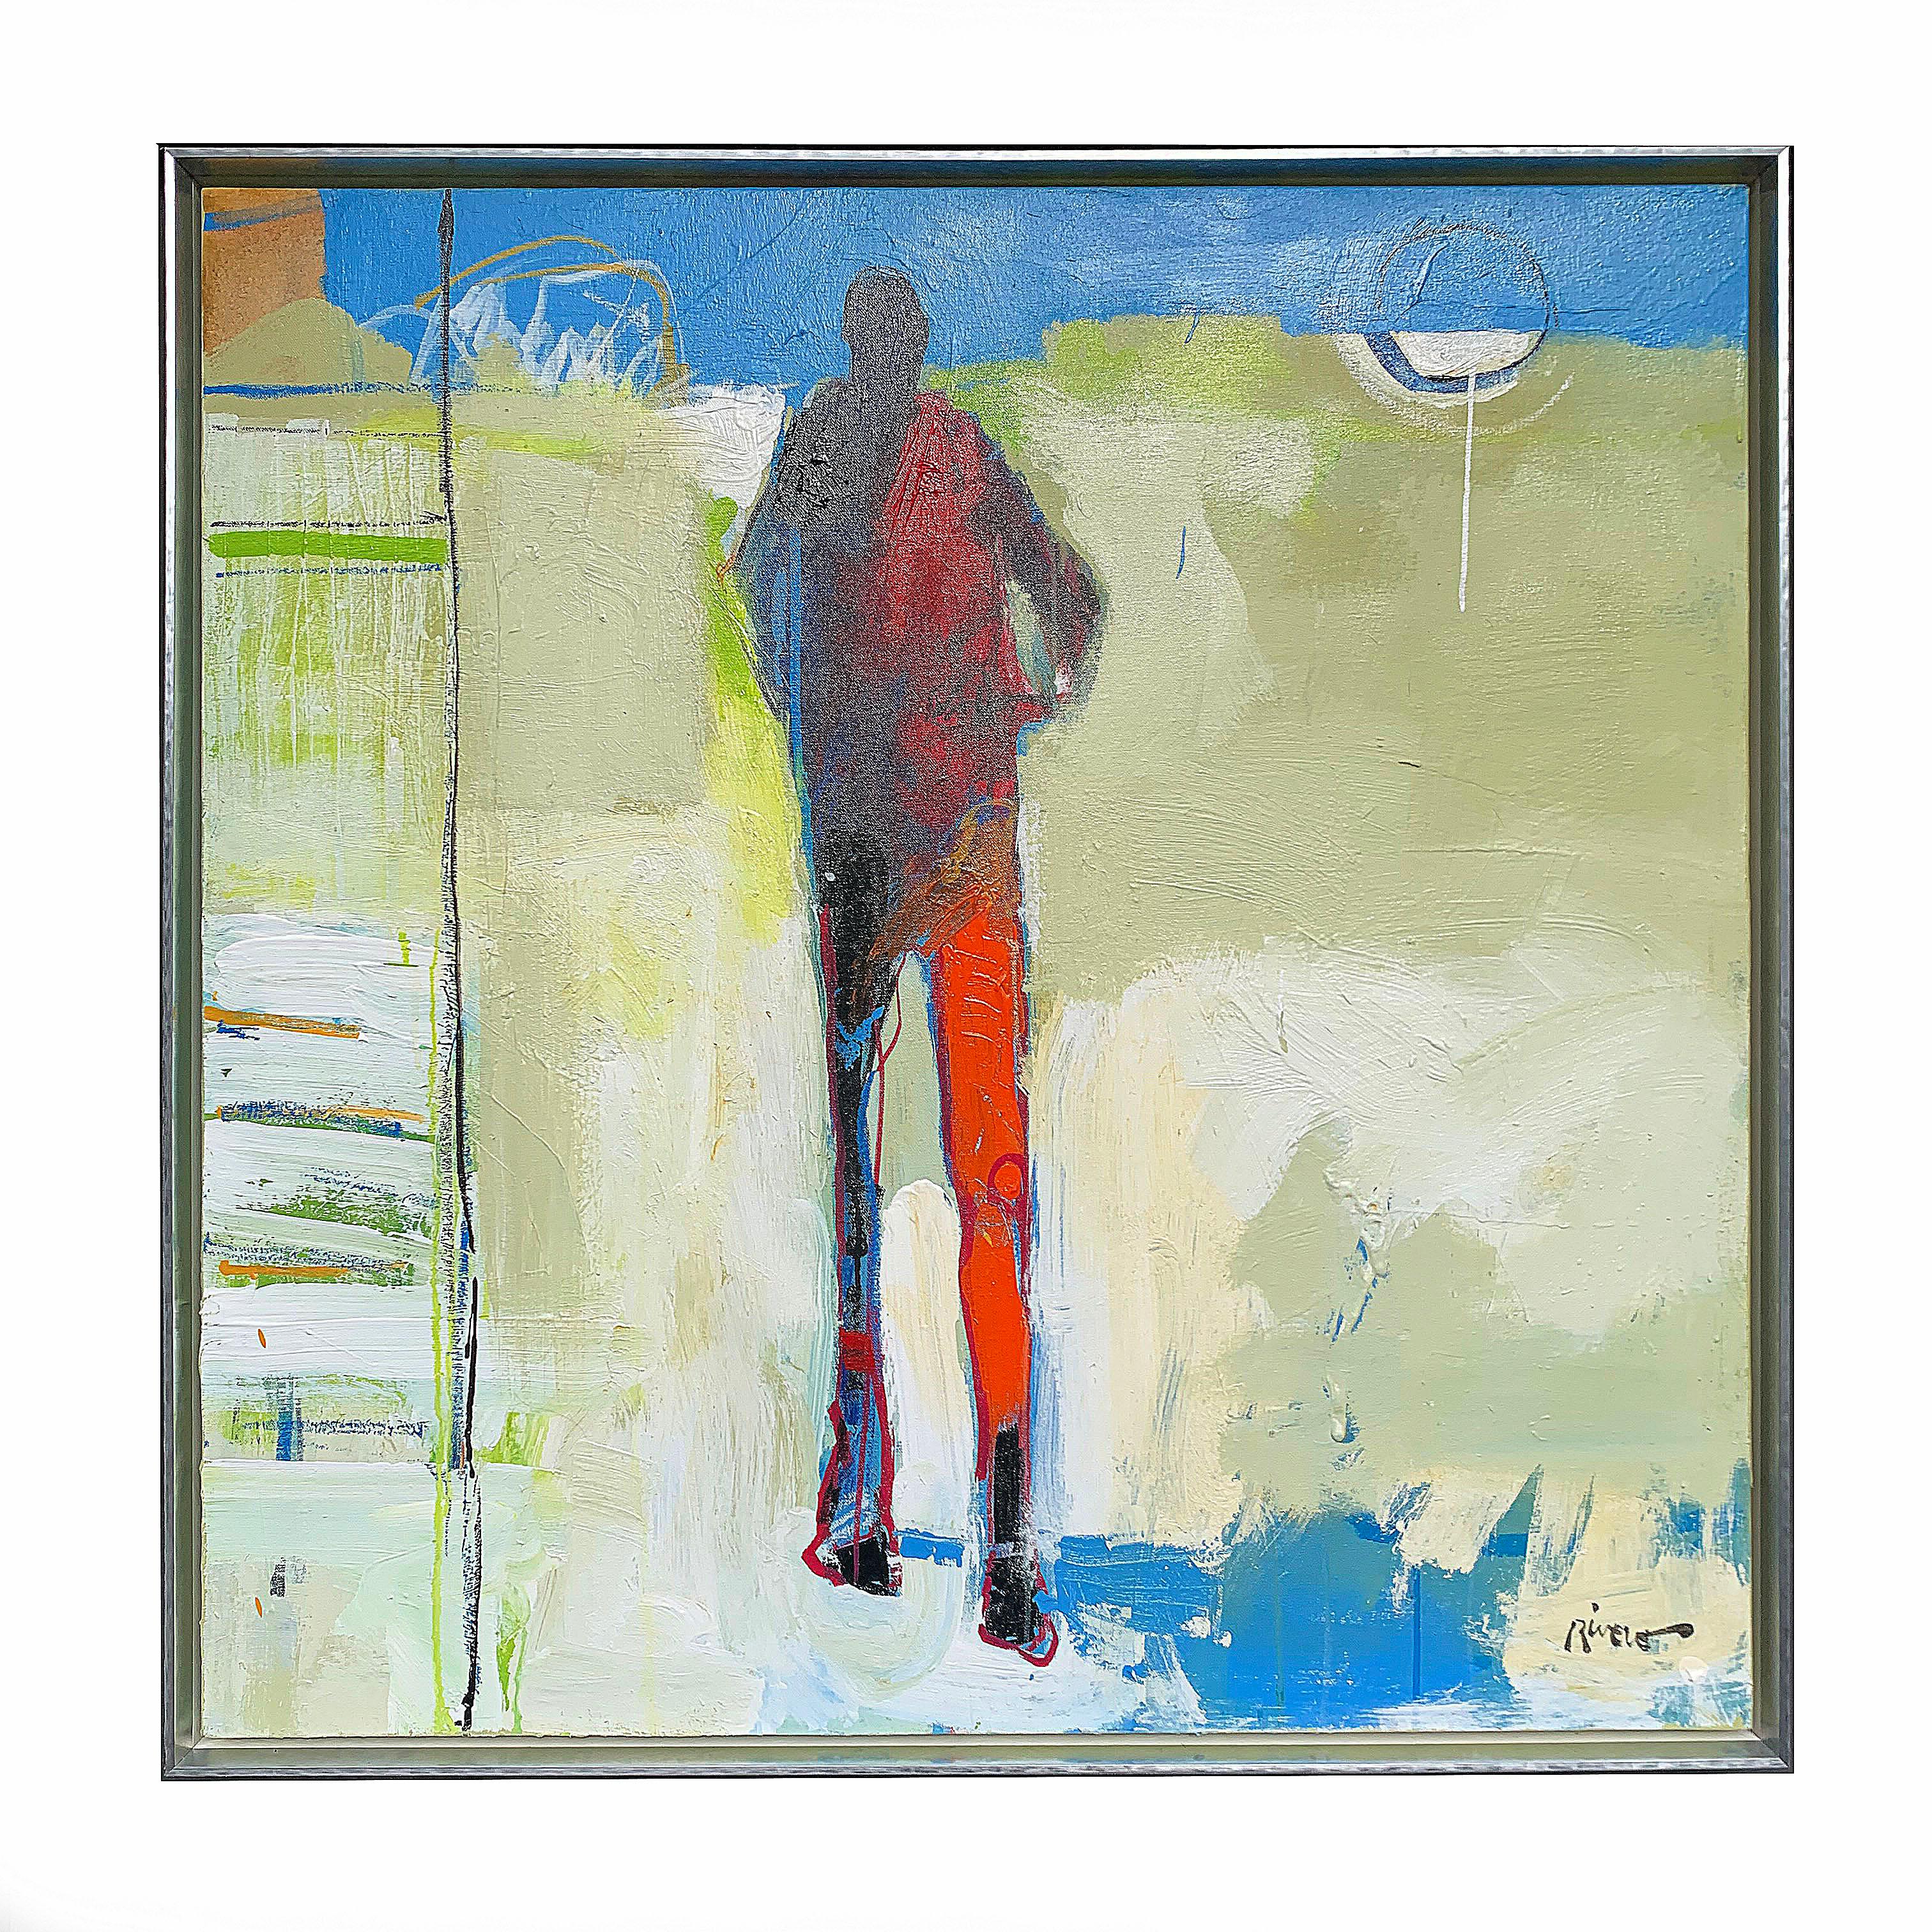 Personaje, acrylic tall figurative on light background, sun at right - Painting by Mike Rivero